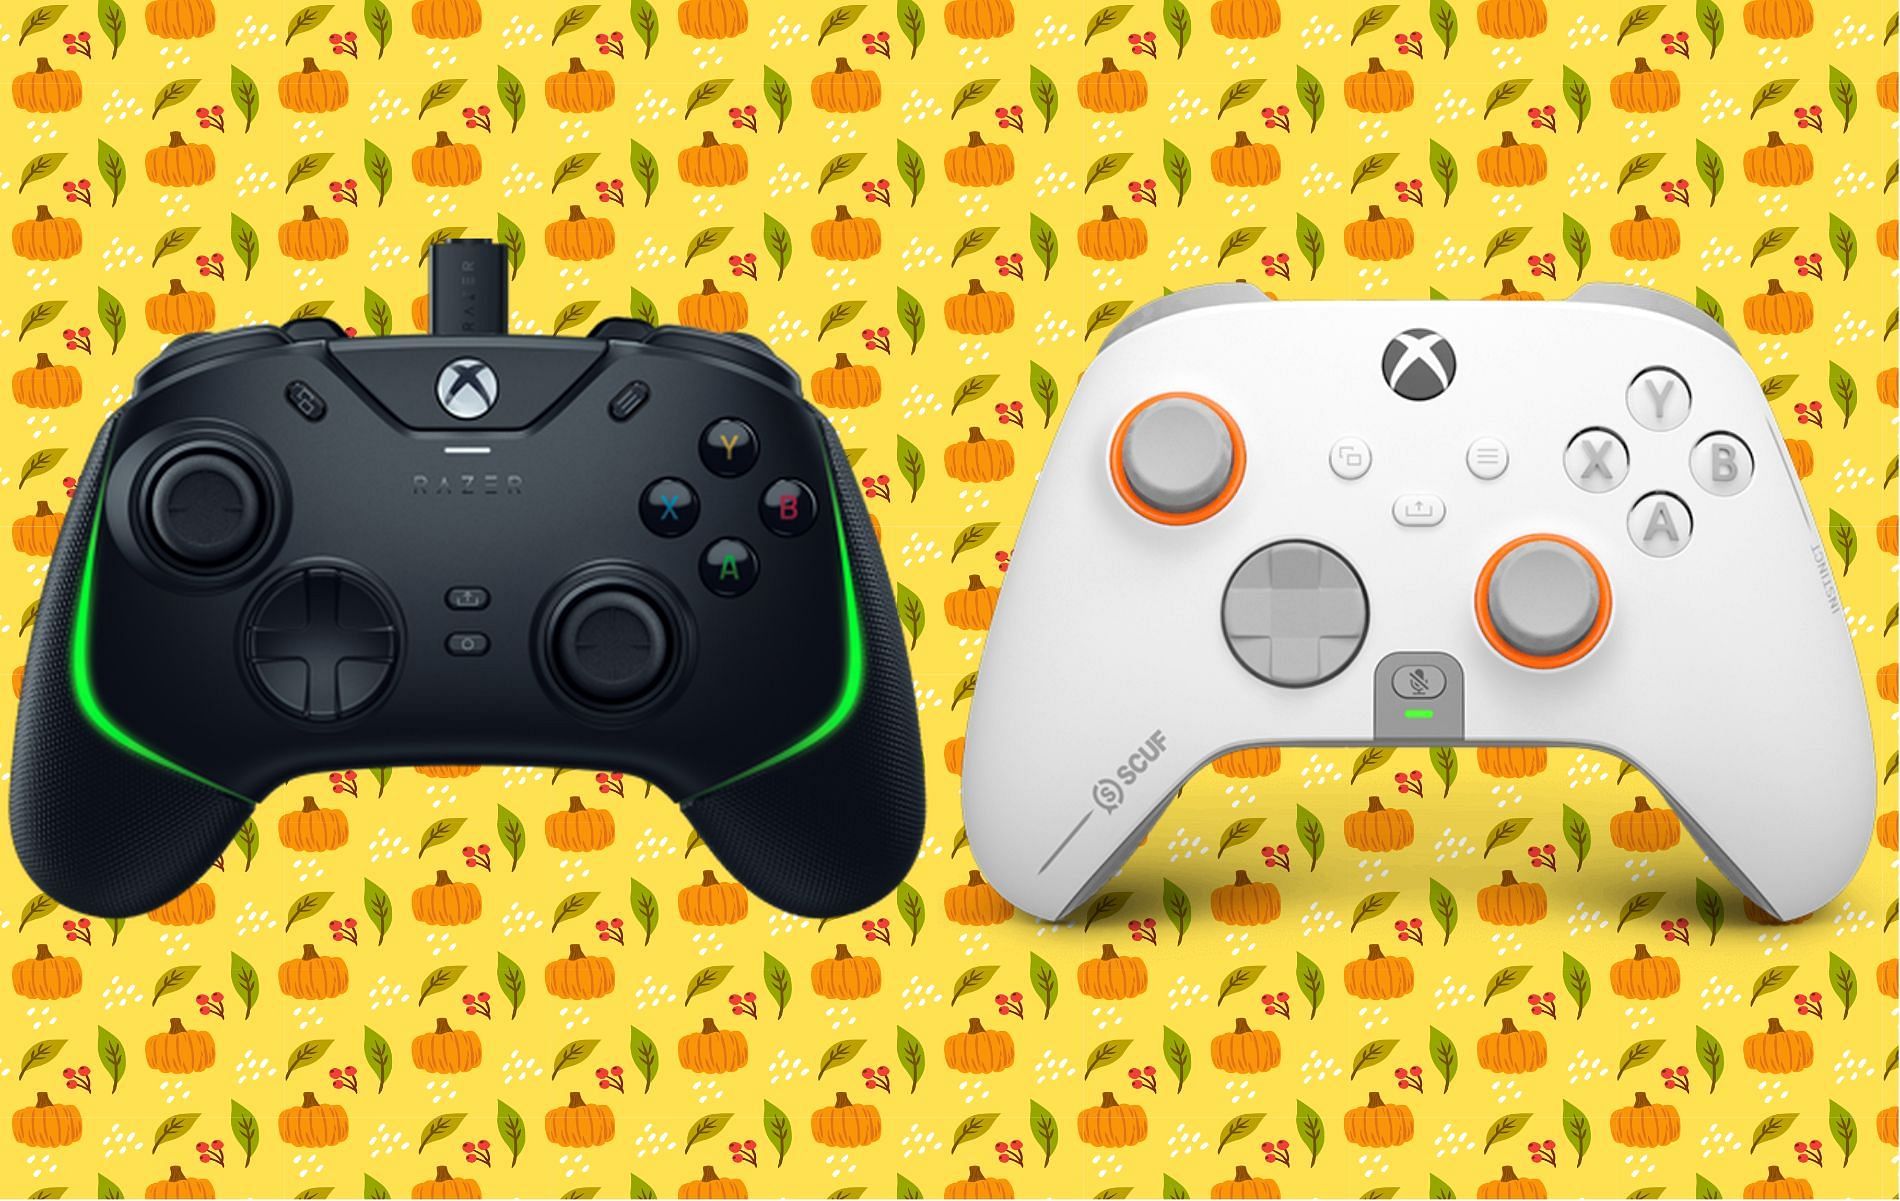 These third-party Xbox controllers are loaded with features and may be available at exciting rates in the Halloween sale 2022. (Image via Razer / Scuf)